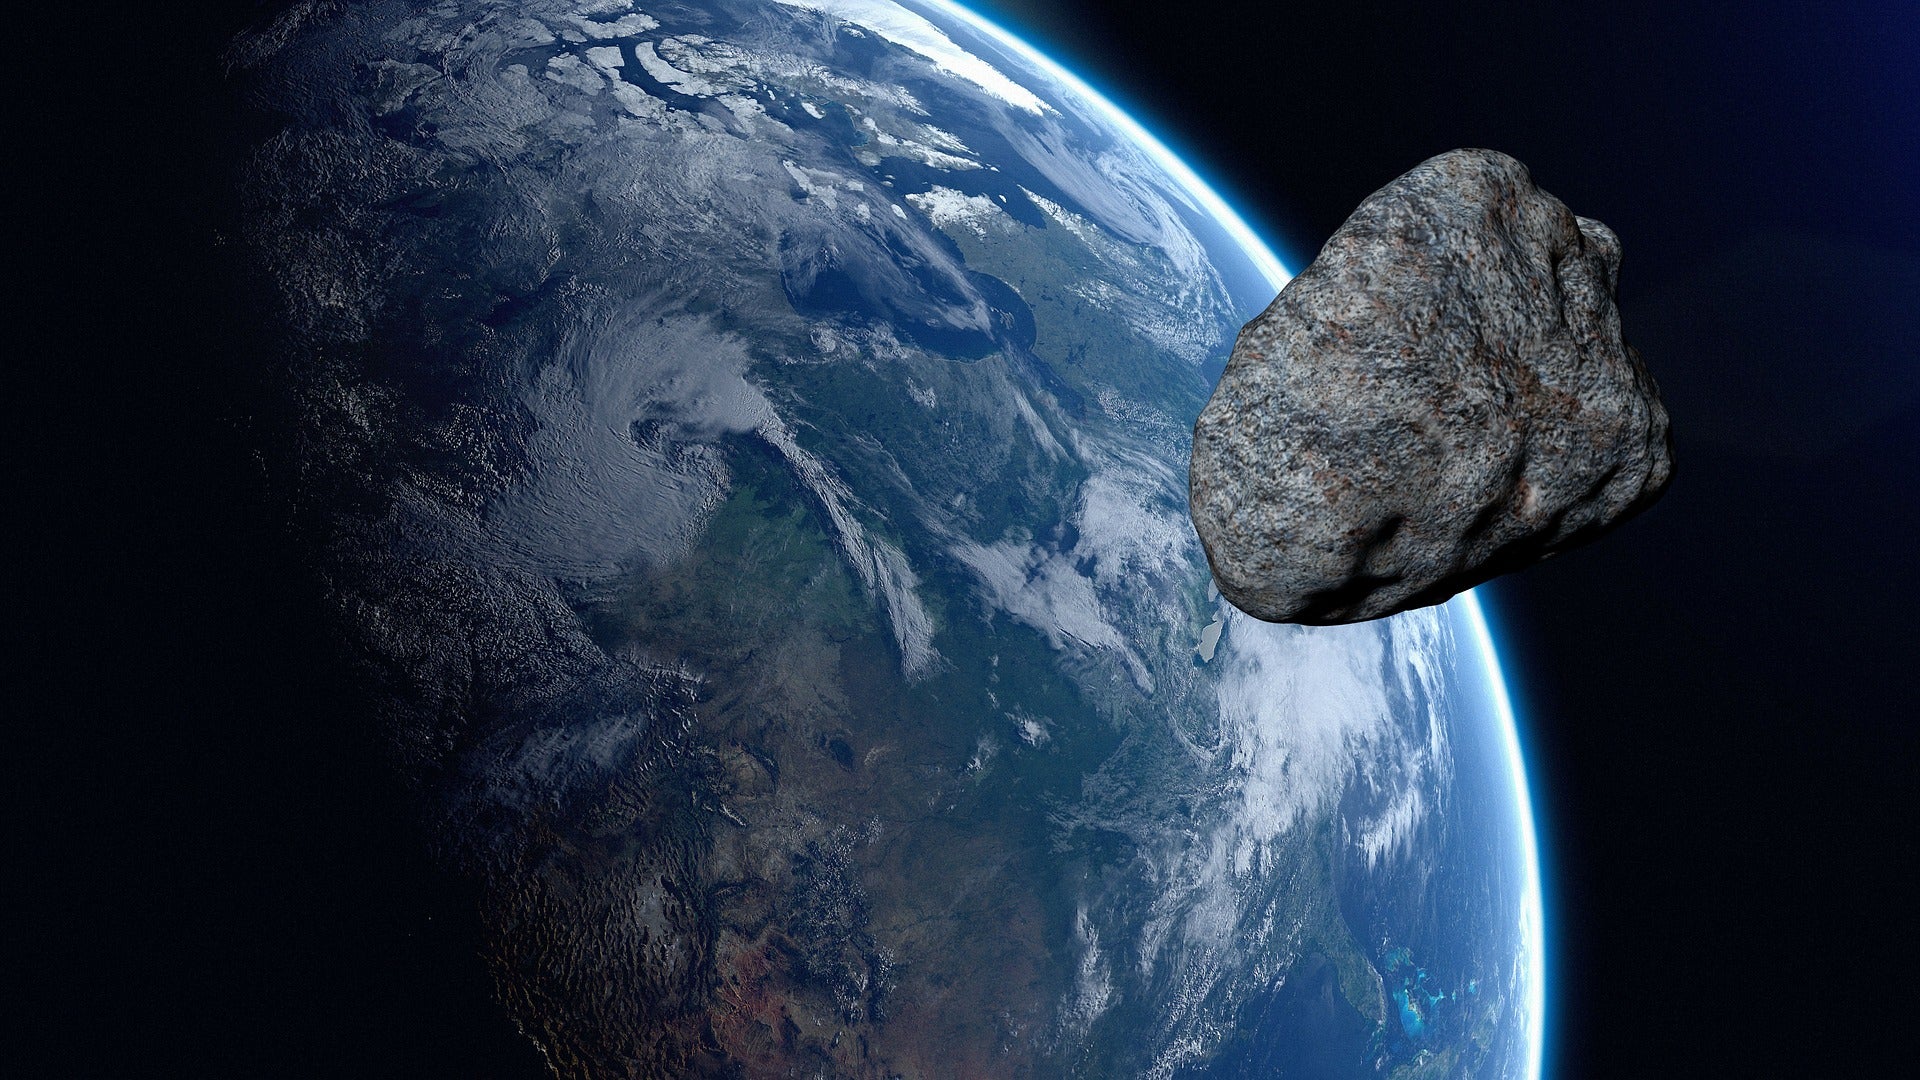 AstroForge plans to launch asteroid-mining technology aboard a SpaceX rocket